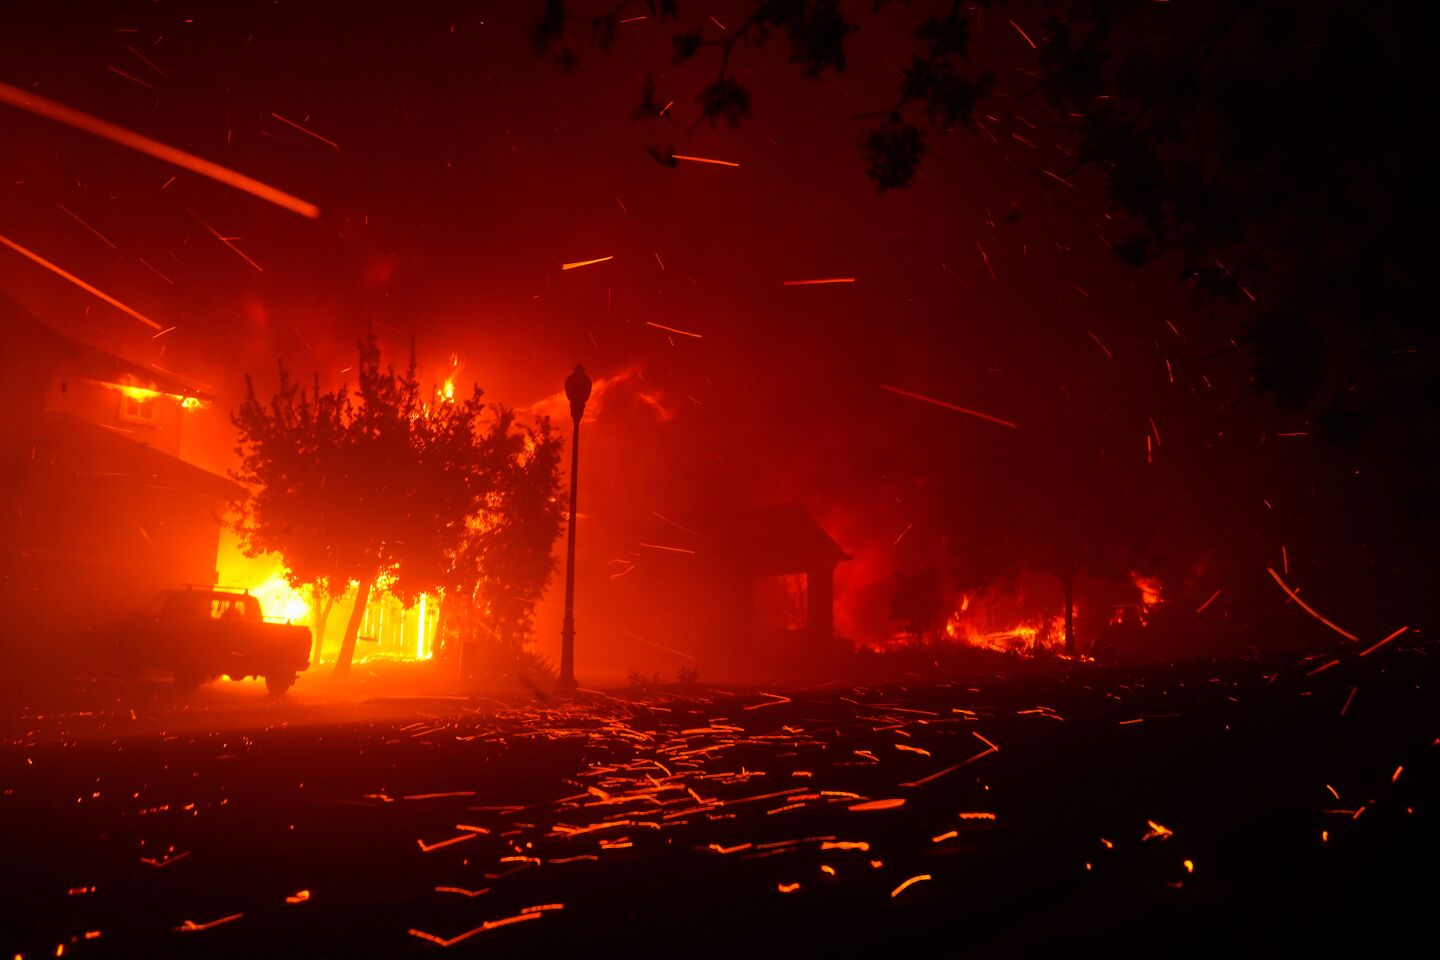 Embers streak the night sky and litter the ground as a home burns in Santa Rosa.